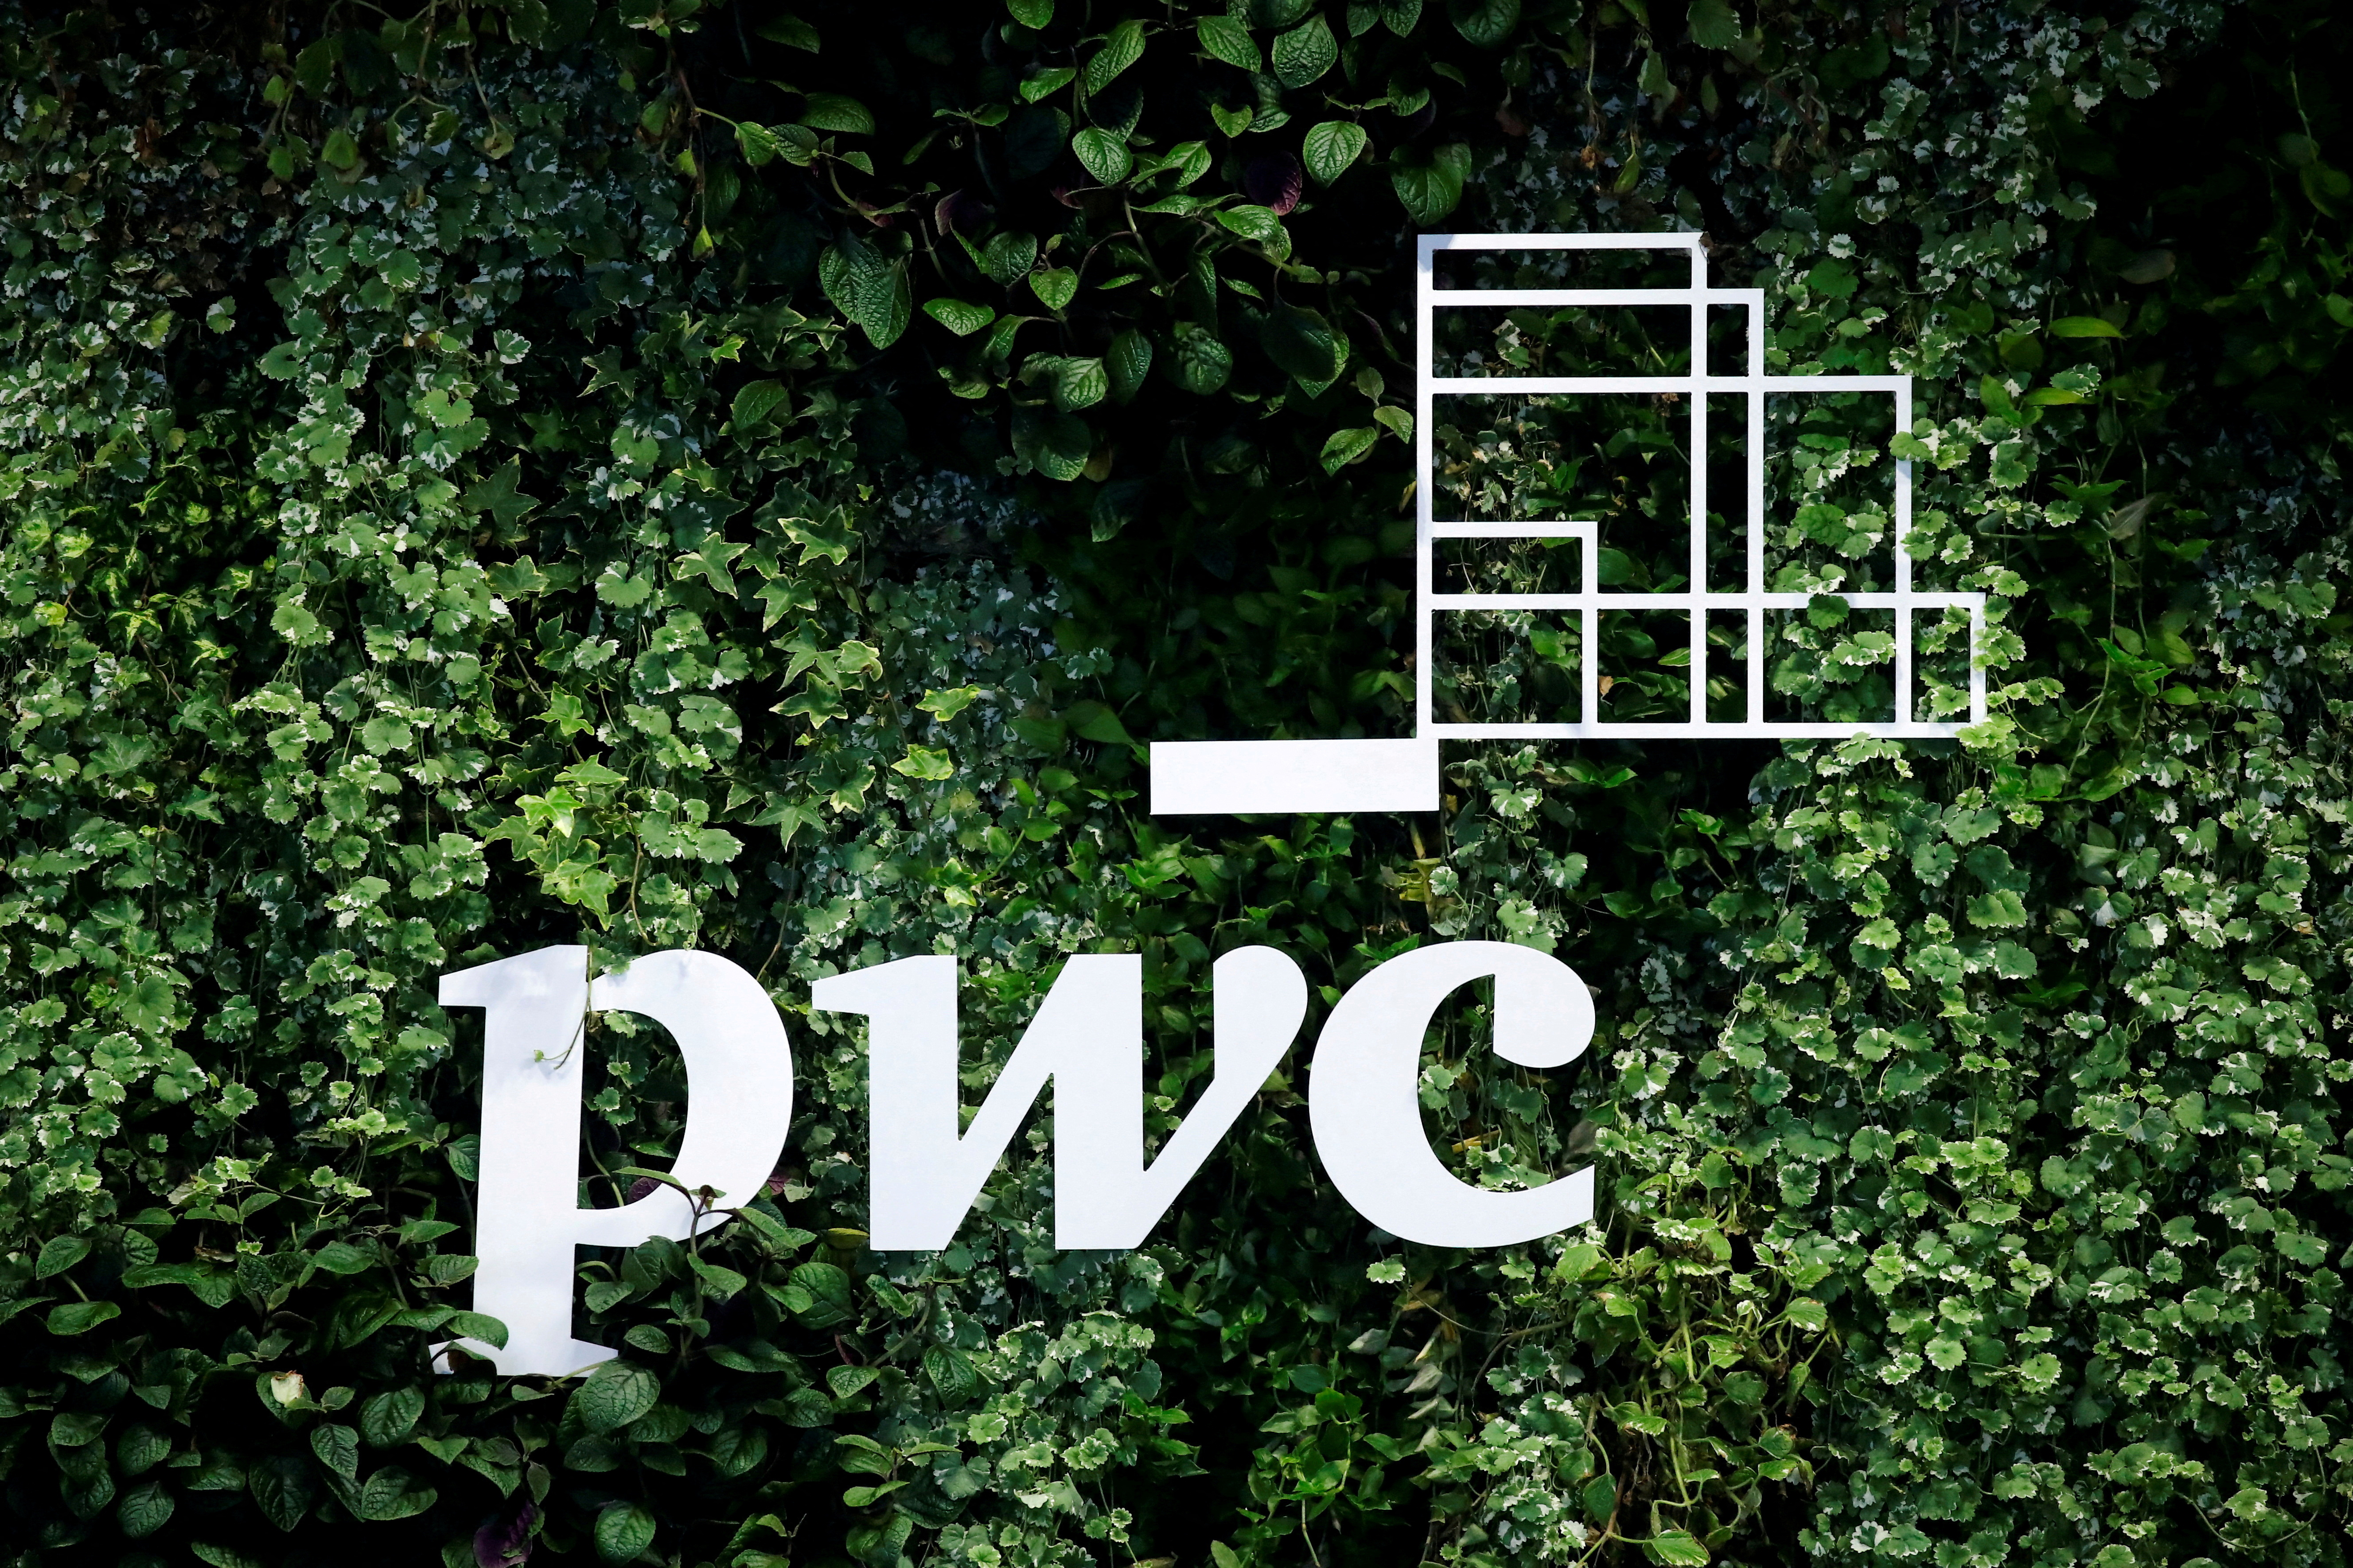 PwC Australia clients, staff in focus as tax leak faces government hearings